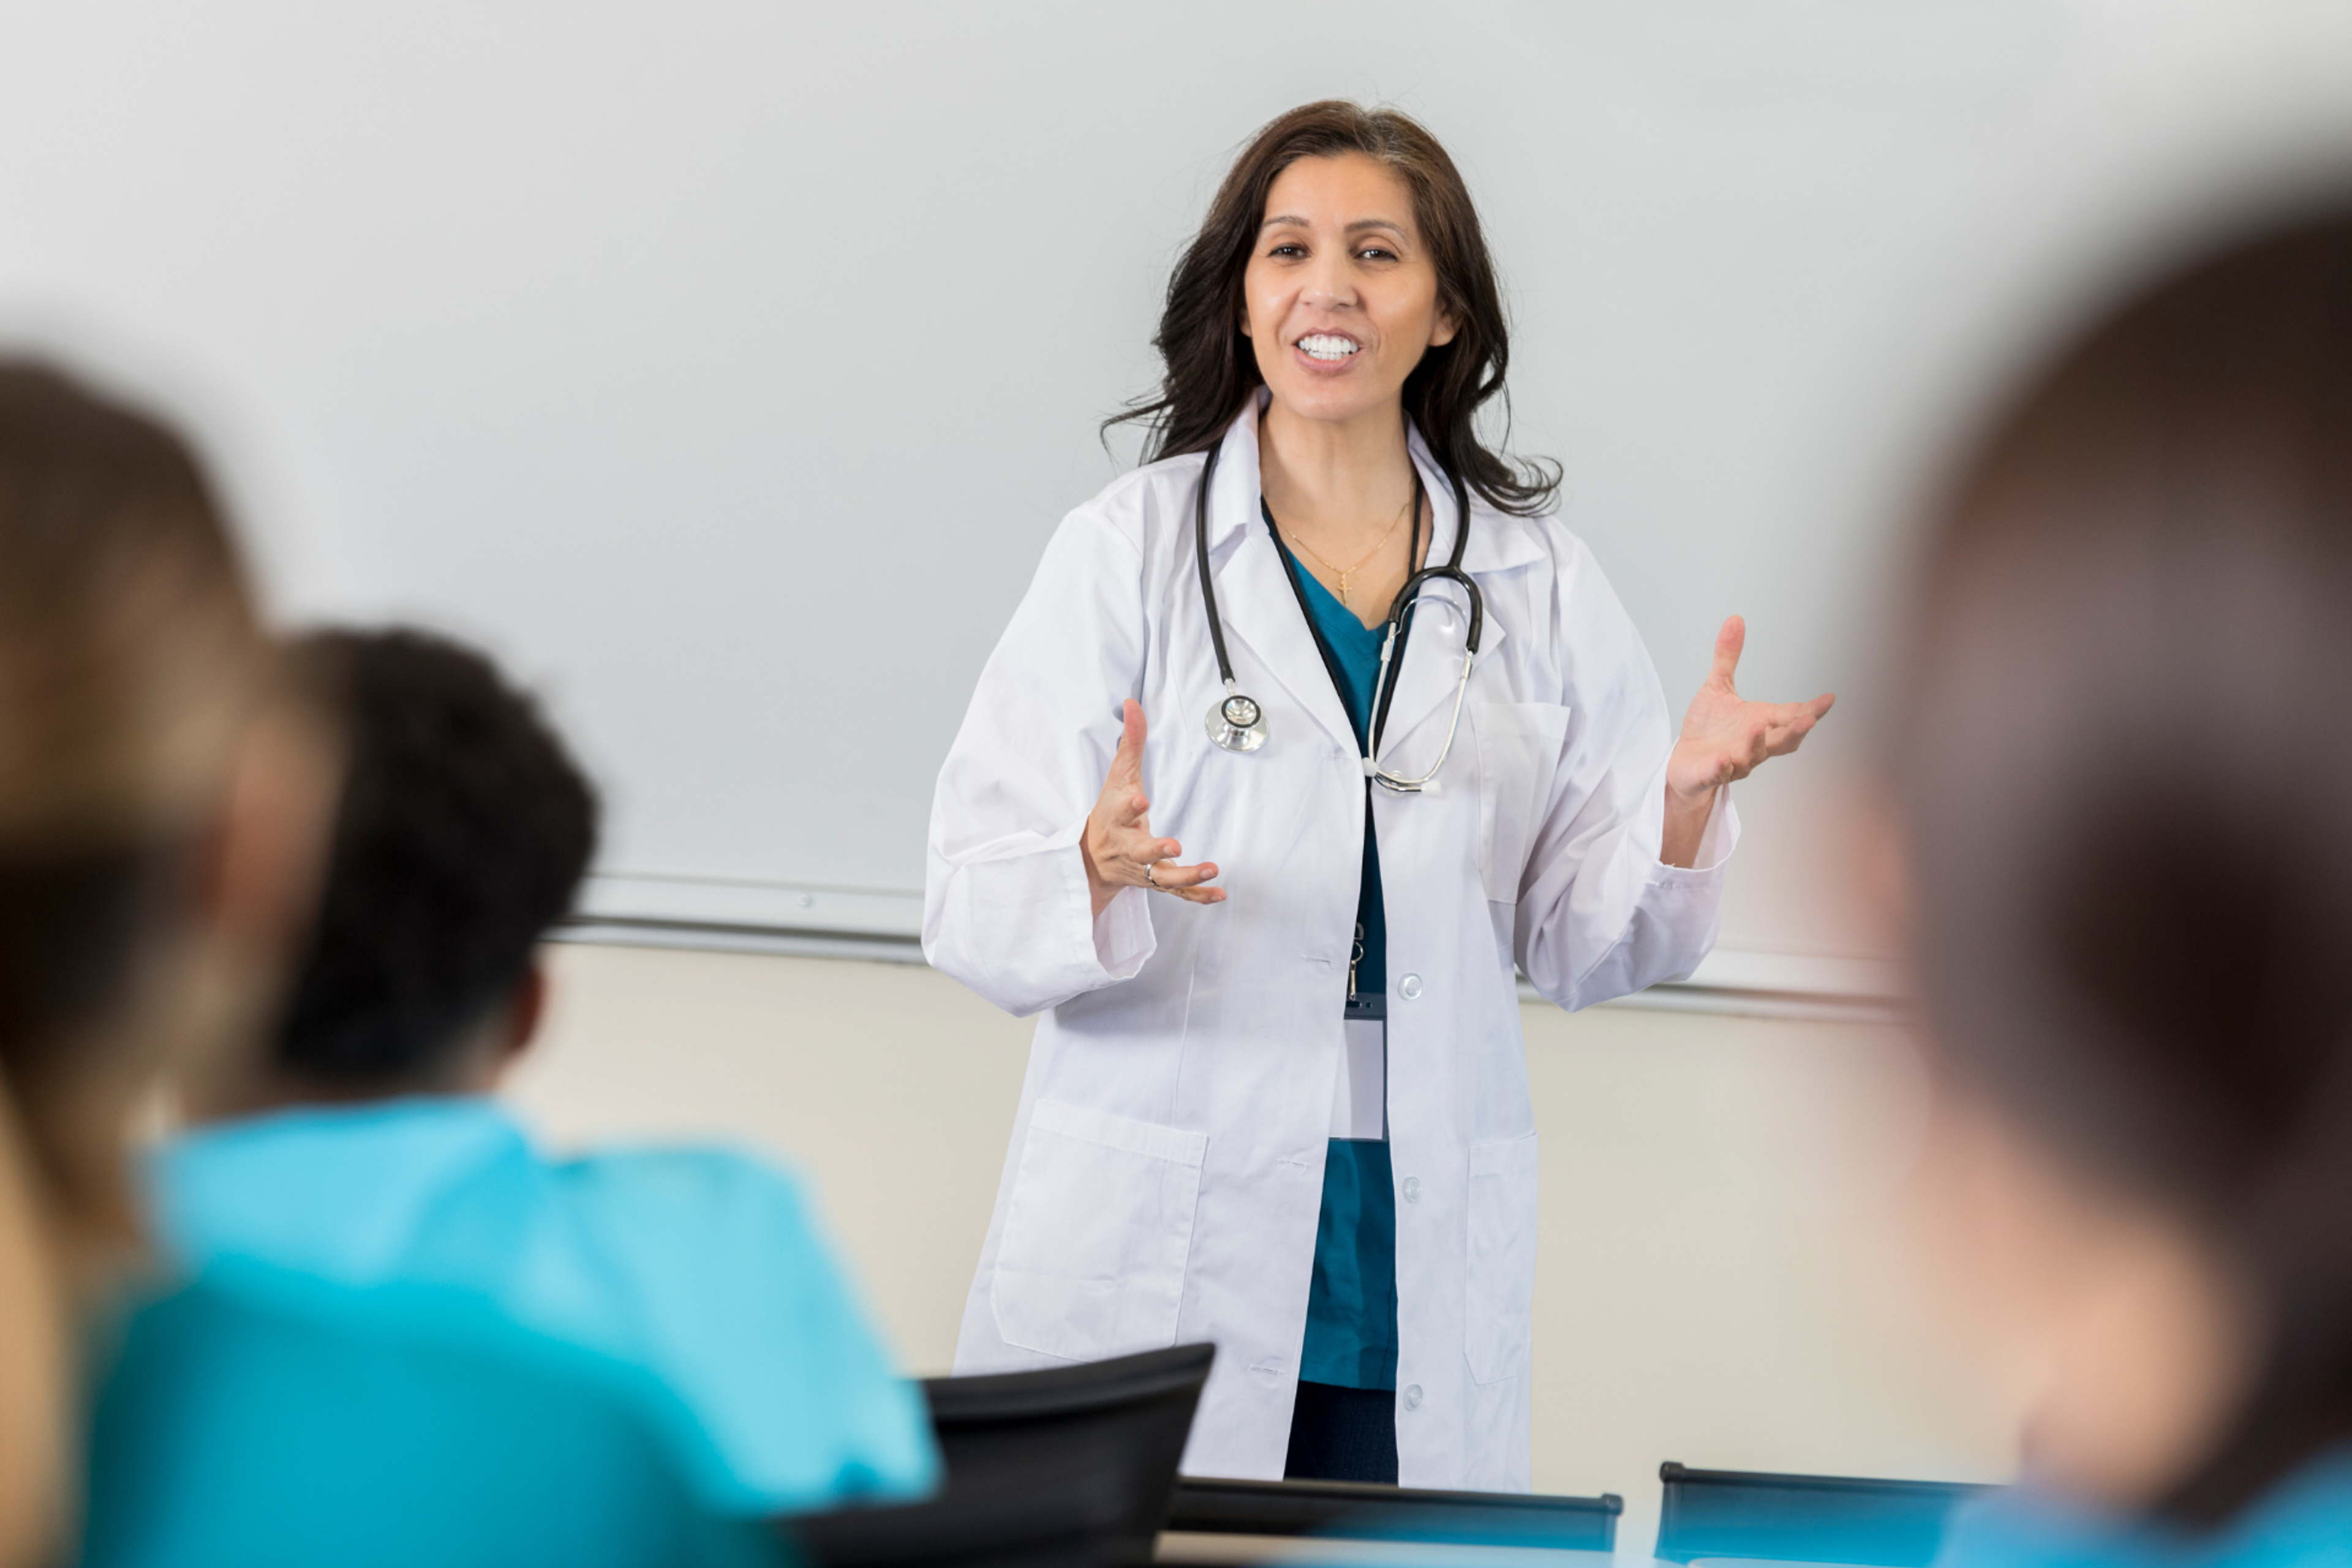 Acceptance Rates and Class Profiles of the Top 15 Medical Schools